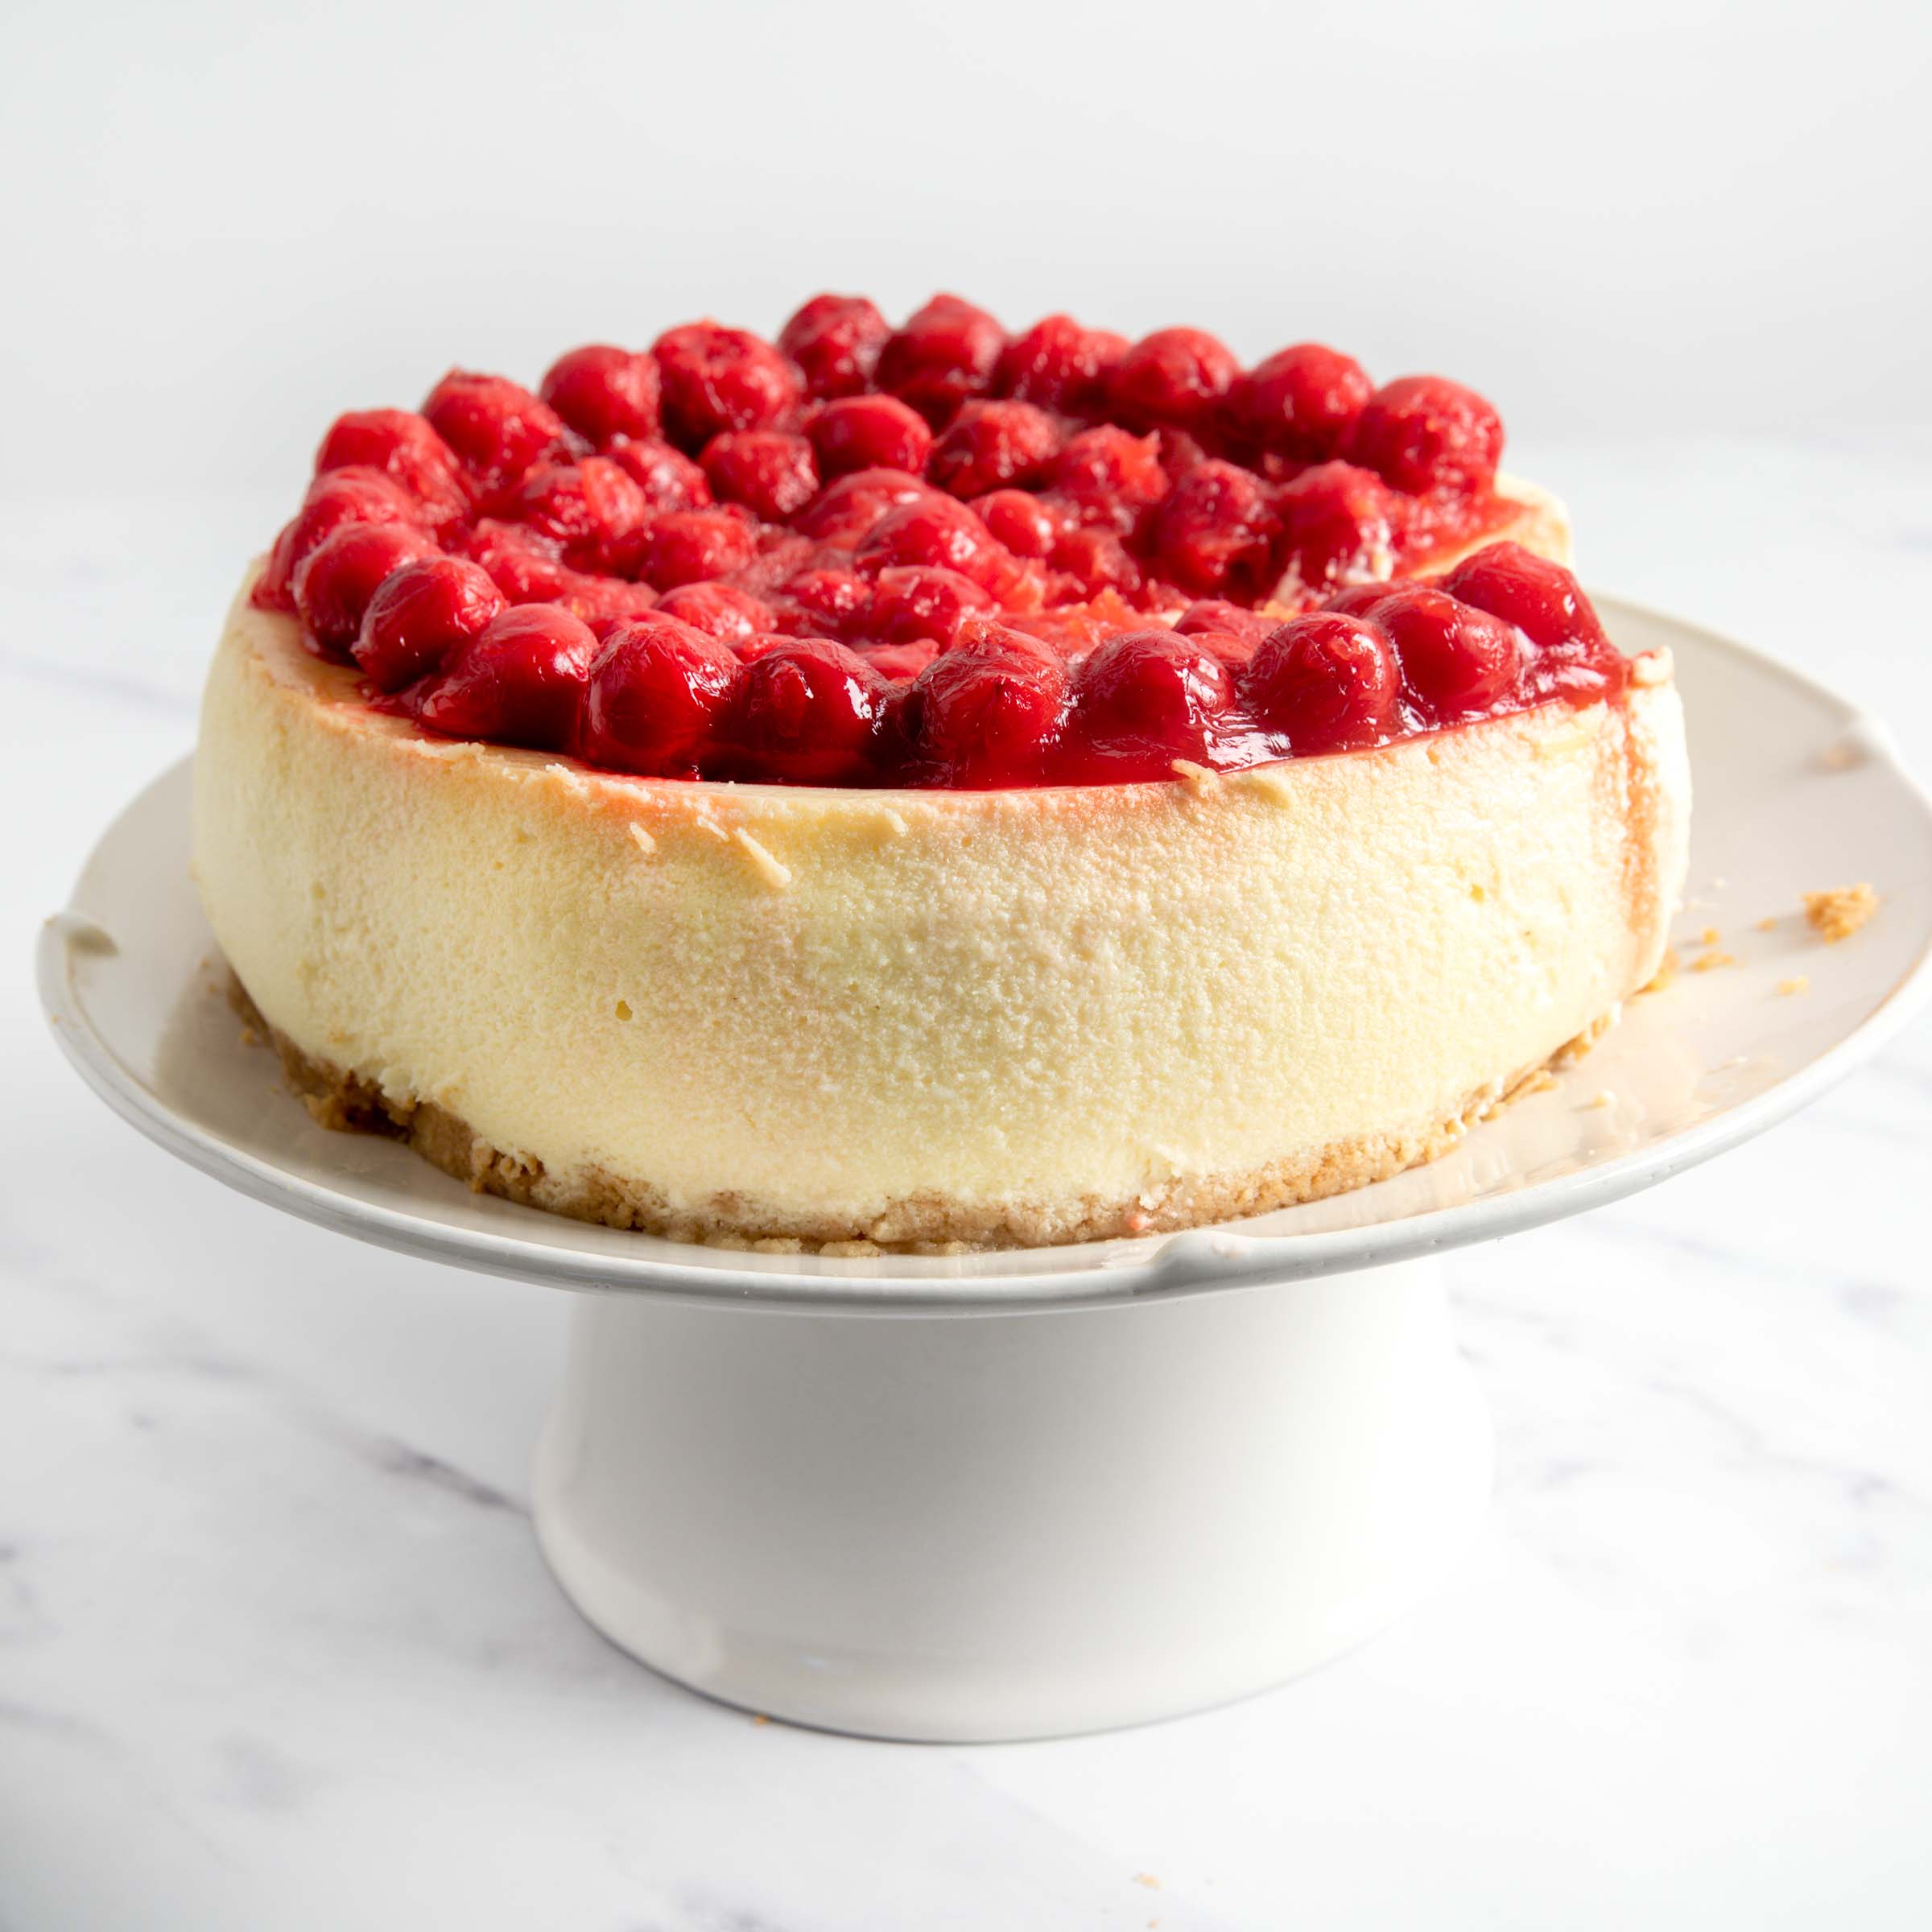 https://cdn.shopify.com/s/files/1/0082/7722/9604/products/M737_geralds_heavenly_cheesecakes_cherry_cheesecake-3.jpg?v=1640101639